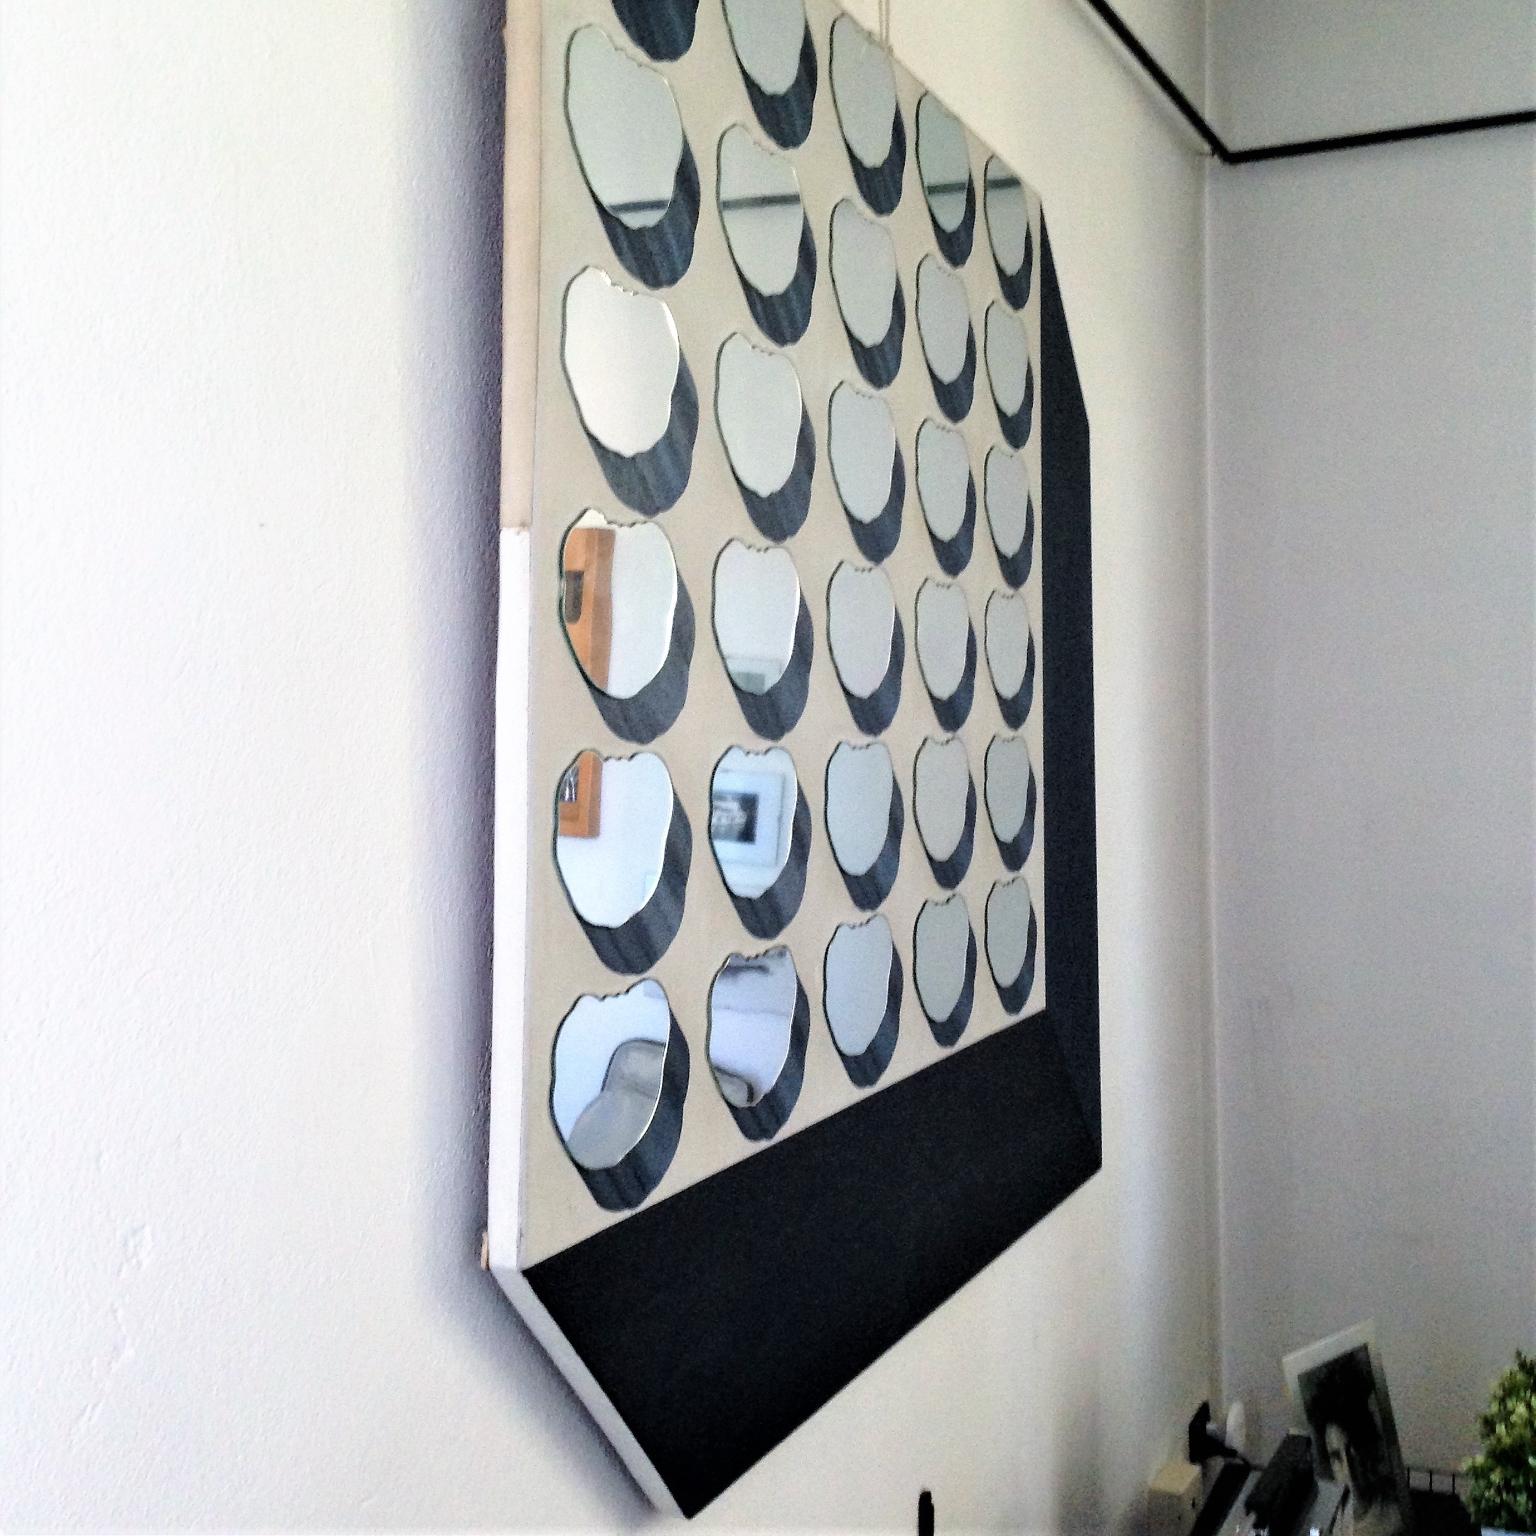 1968 Mirrored Pop Art Wall Sculpture, Concetto Pozzati, Acrylic on Canvas, Italy For Sale 6